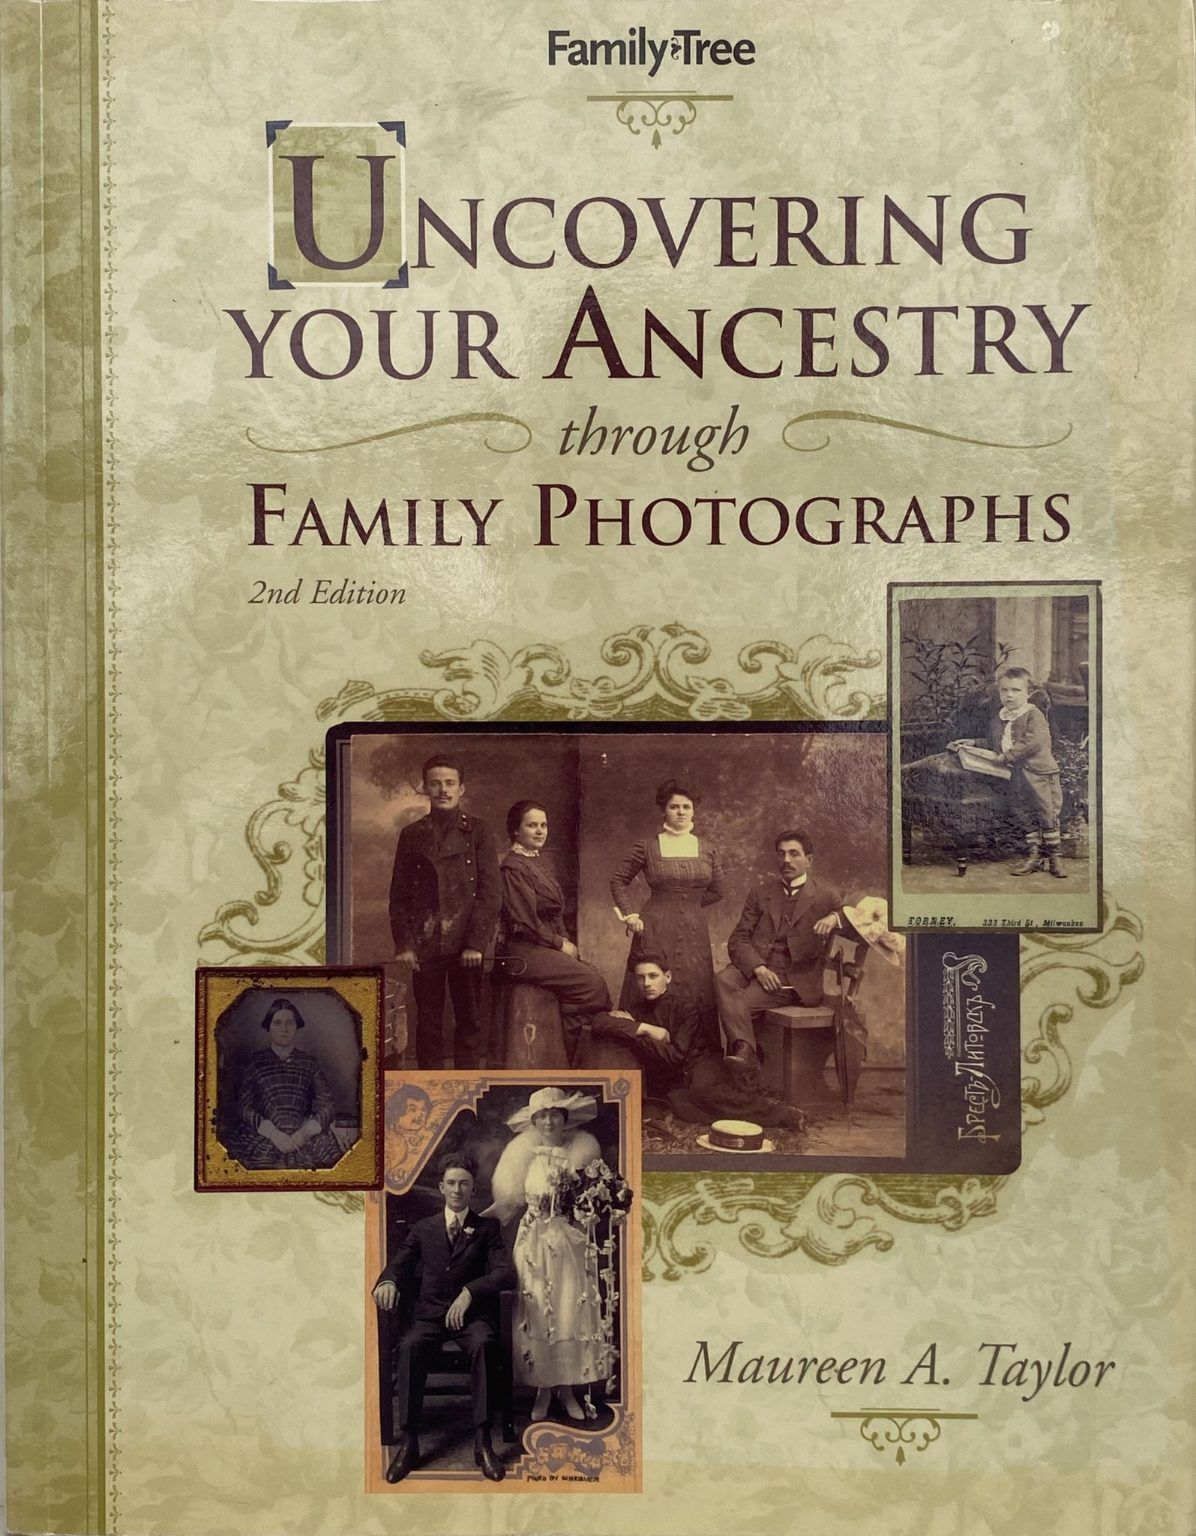 UNCOVERING YOUR ANCESTRY THROUGH FAMILY PHOTOGRAPHS: Second Edition